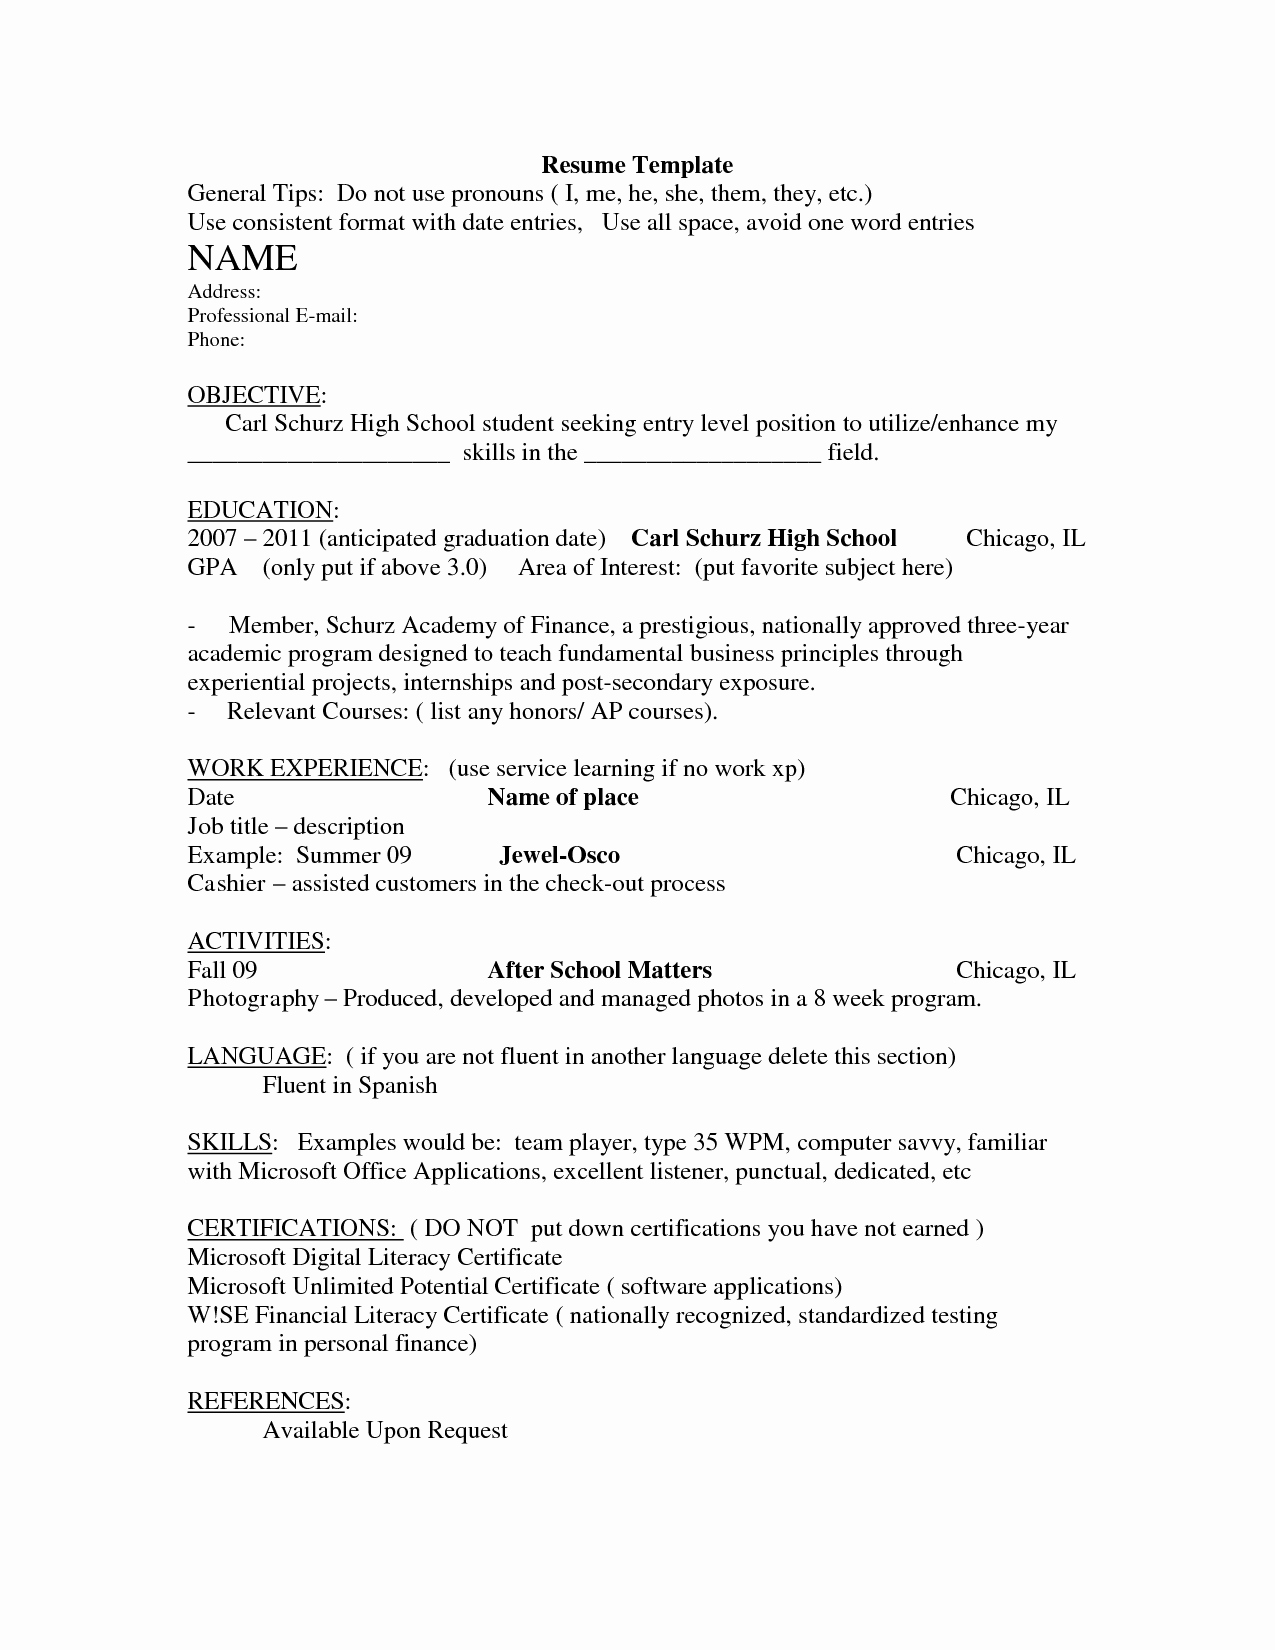 Resume Examples for Highschool Students Lovely Resume for Non High School Graduate Resume Ideas